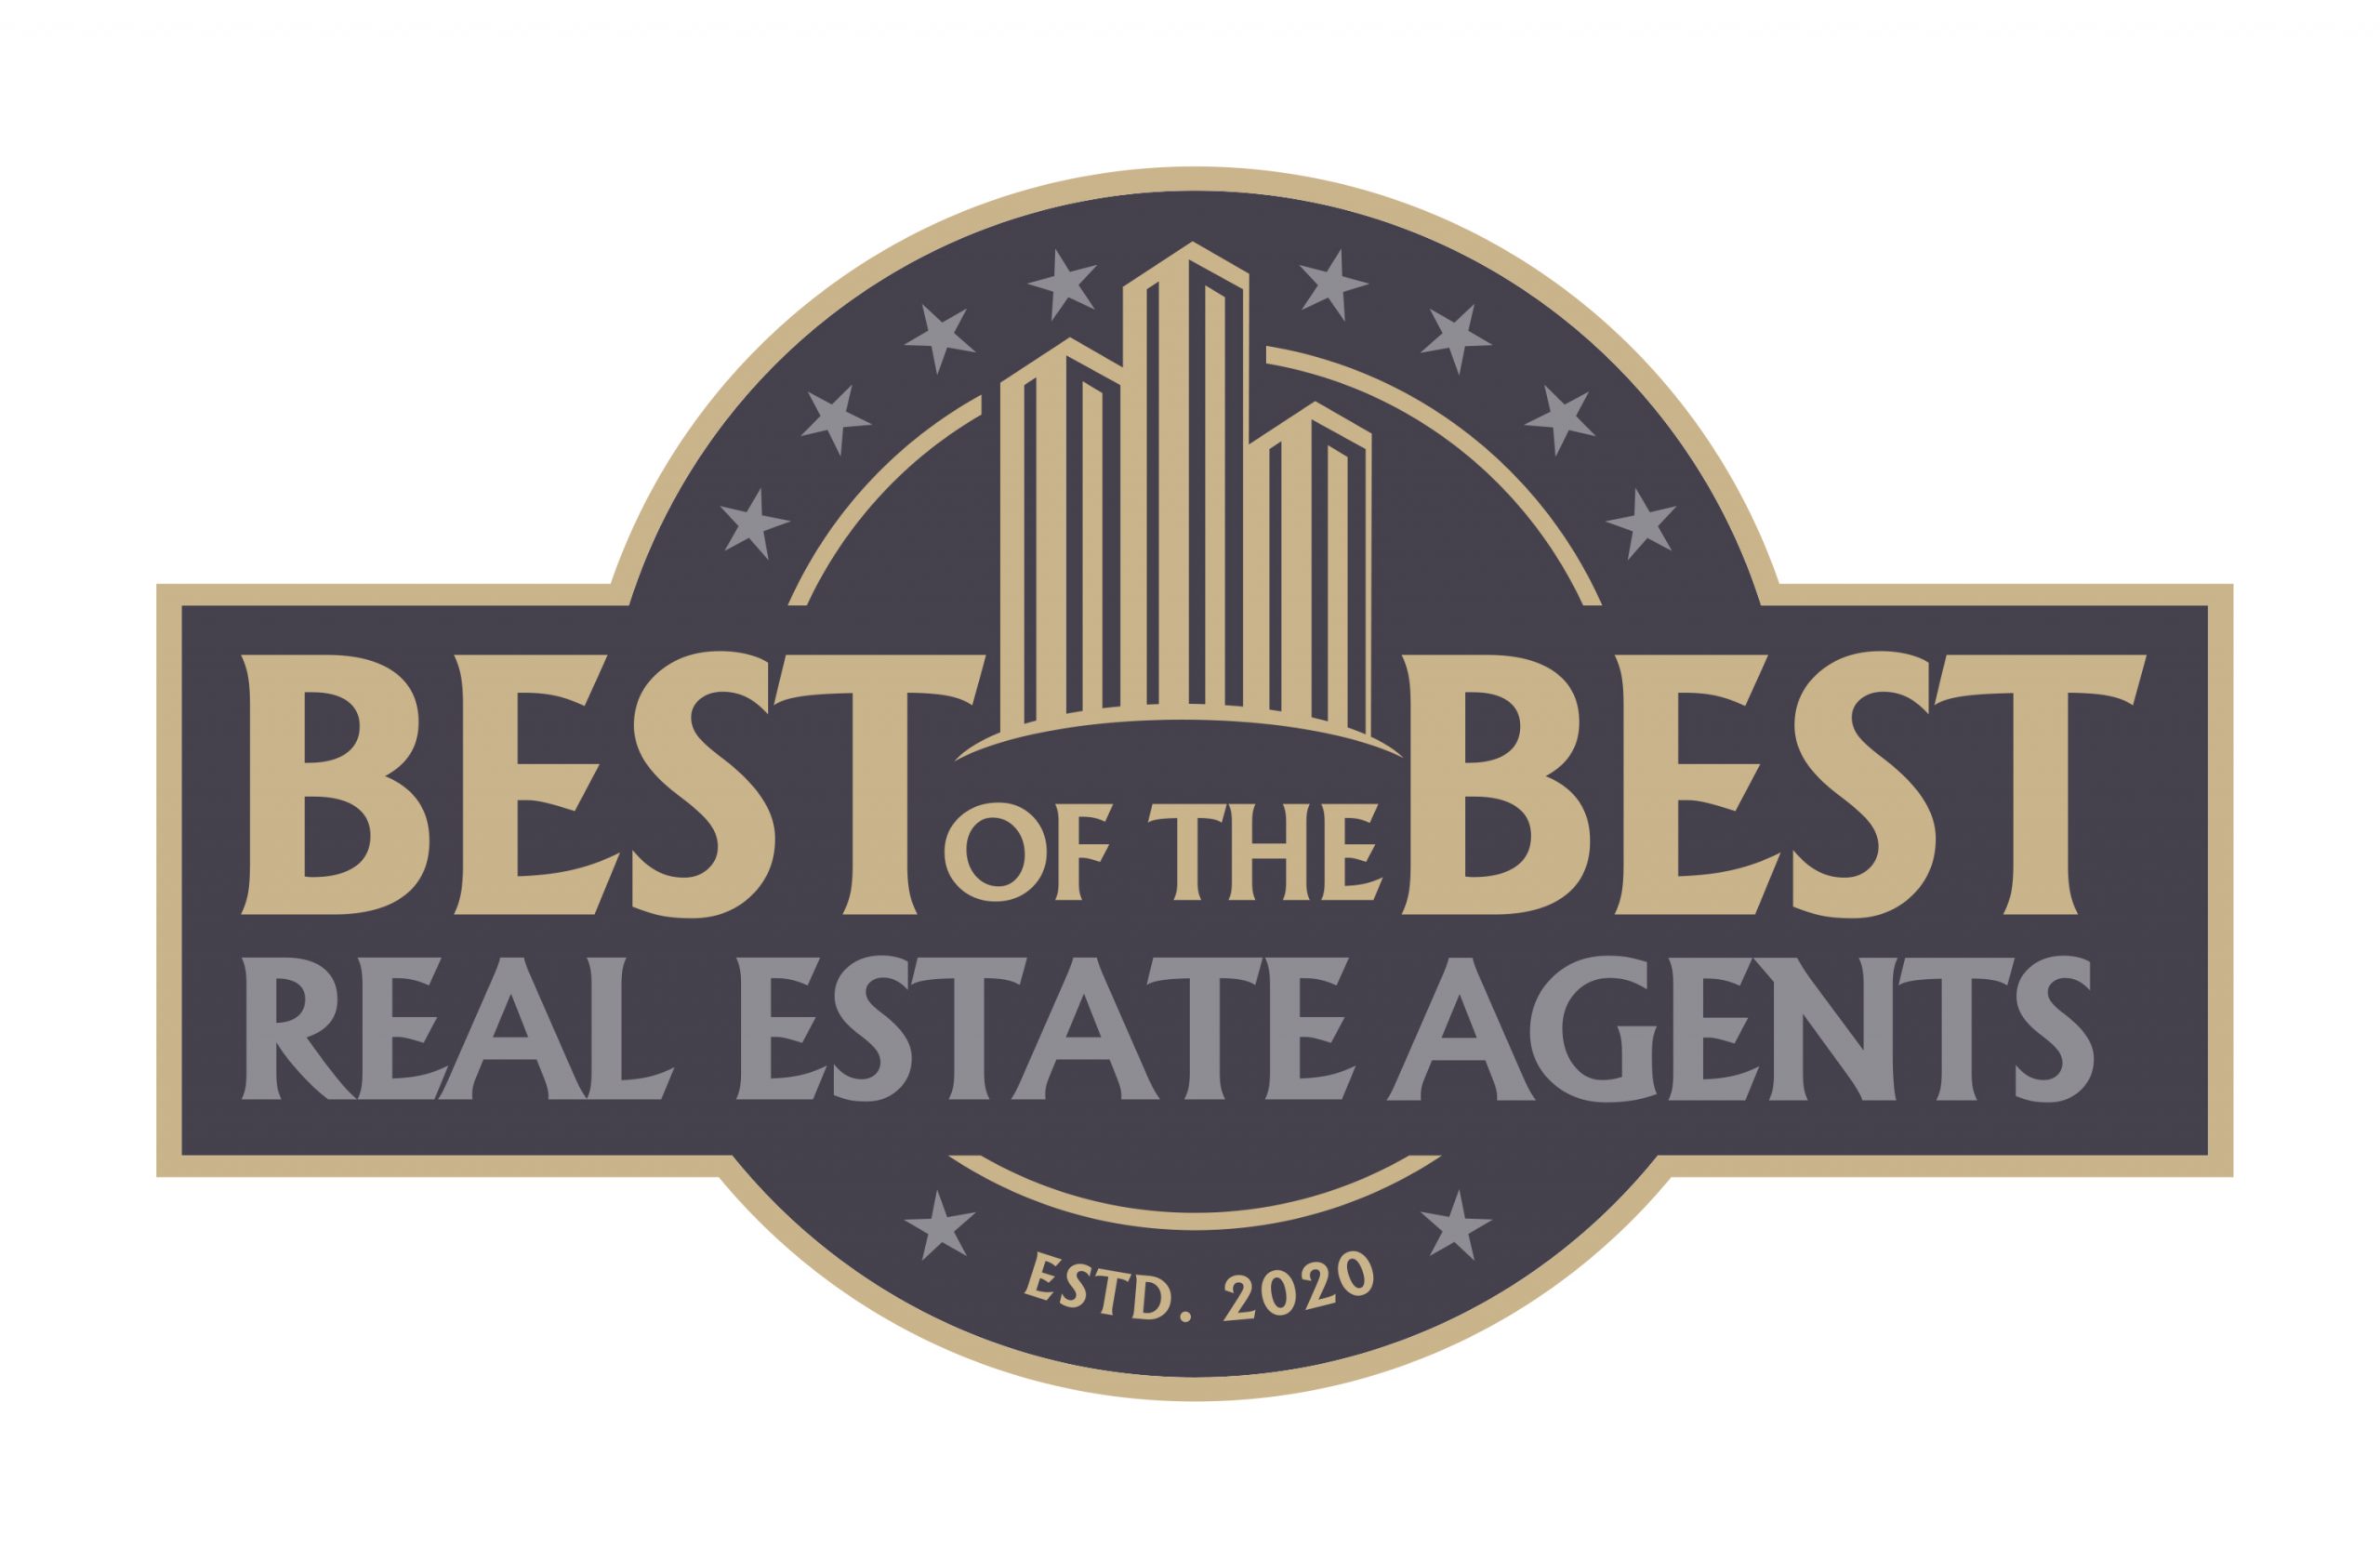 Best of the Best Real Estate Agents